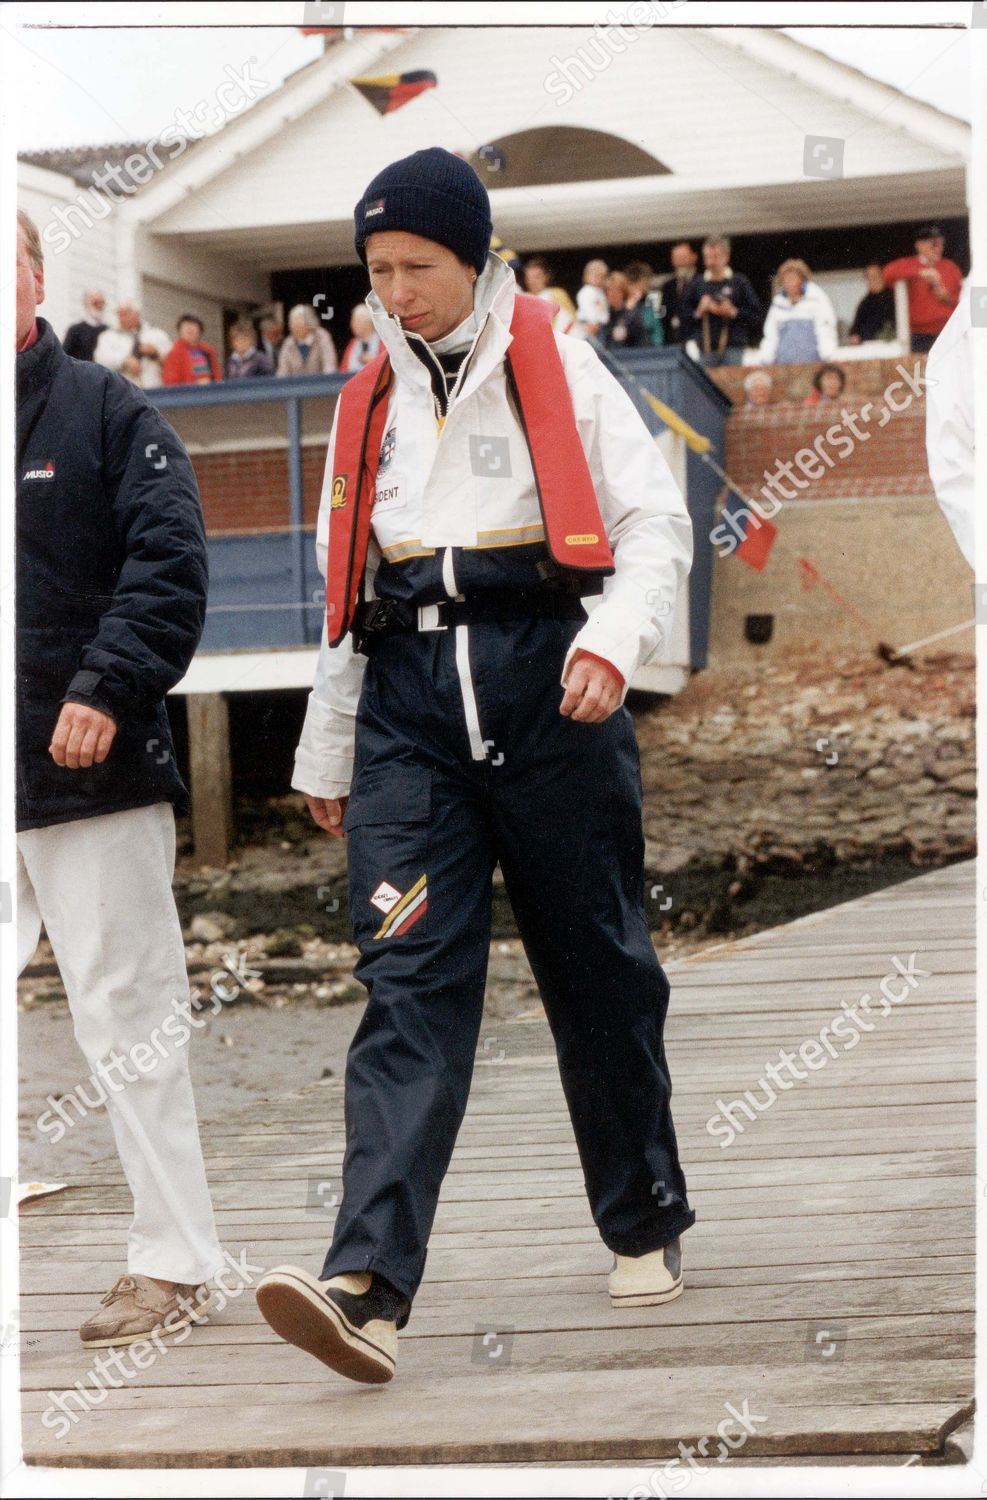 princess-anne-now-princess-royal-sailing-september-1992-the-princess-royal-was-on-the-shores-of-the-crouch-in-essex-attending-the-centenary-celebrations-of-burnham-week-while-commander-laurence-spent-the-day-at-his-ministry-of-defence-desk-in-whi-shutterstock-editorial-930557a.jpg